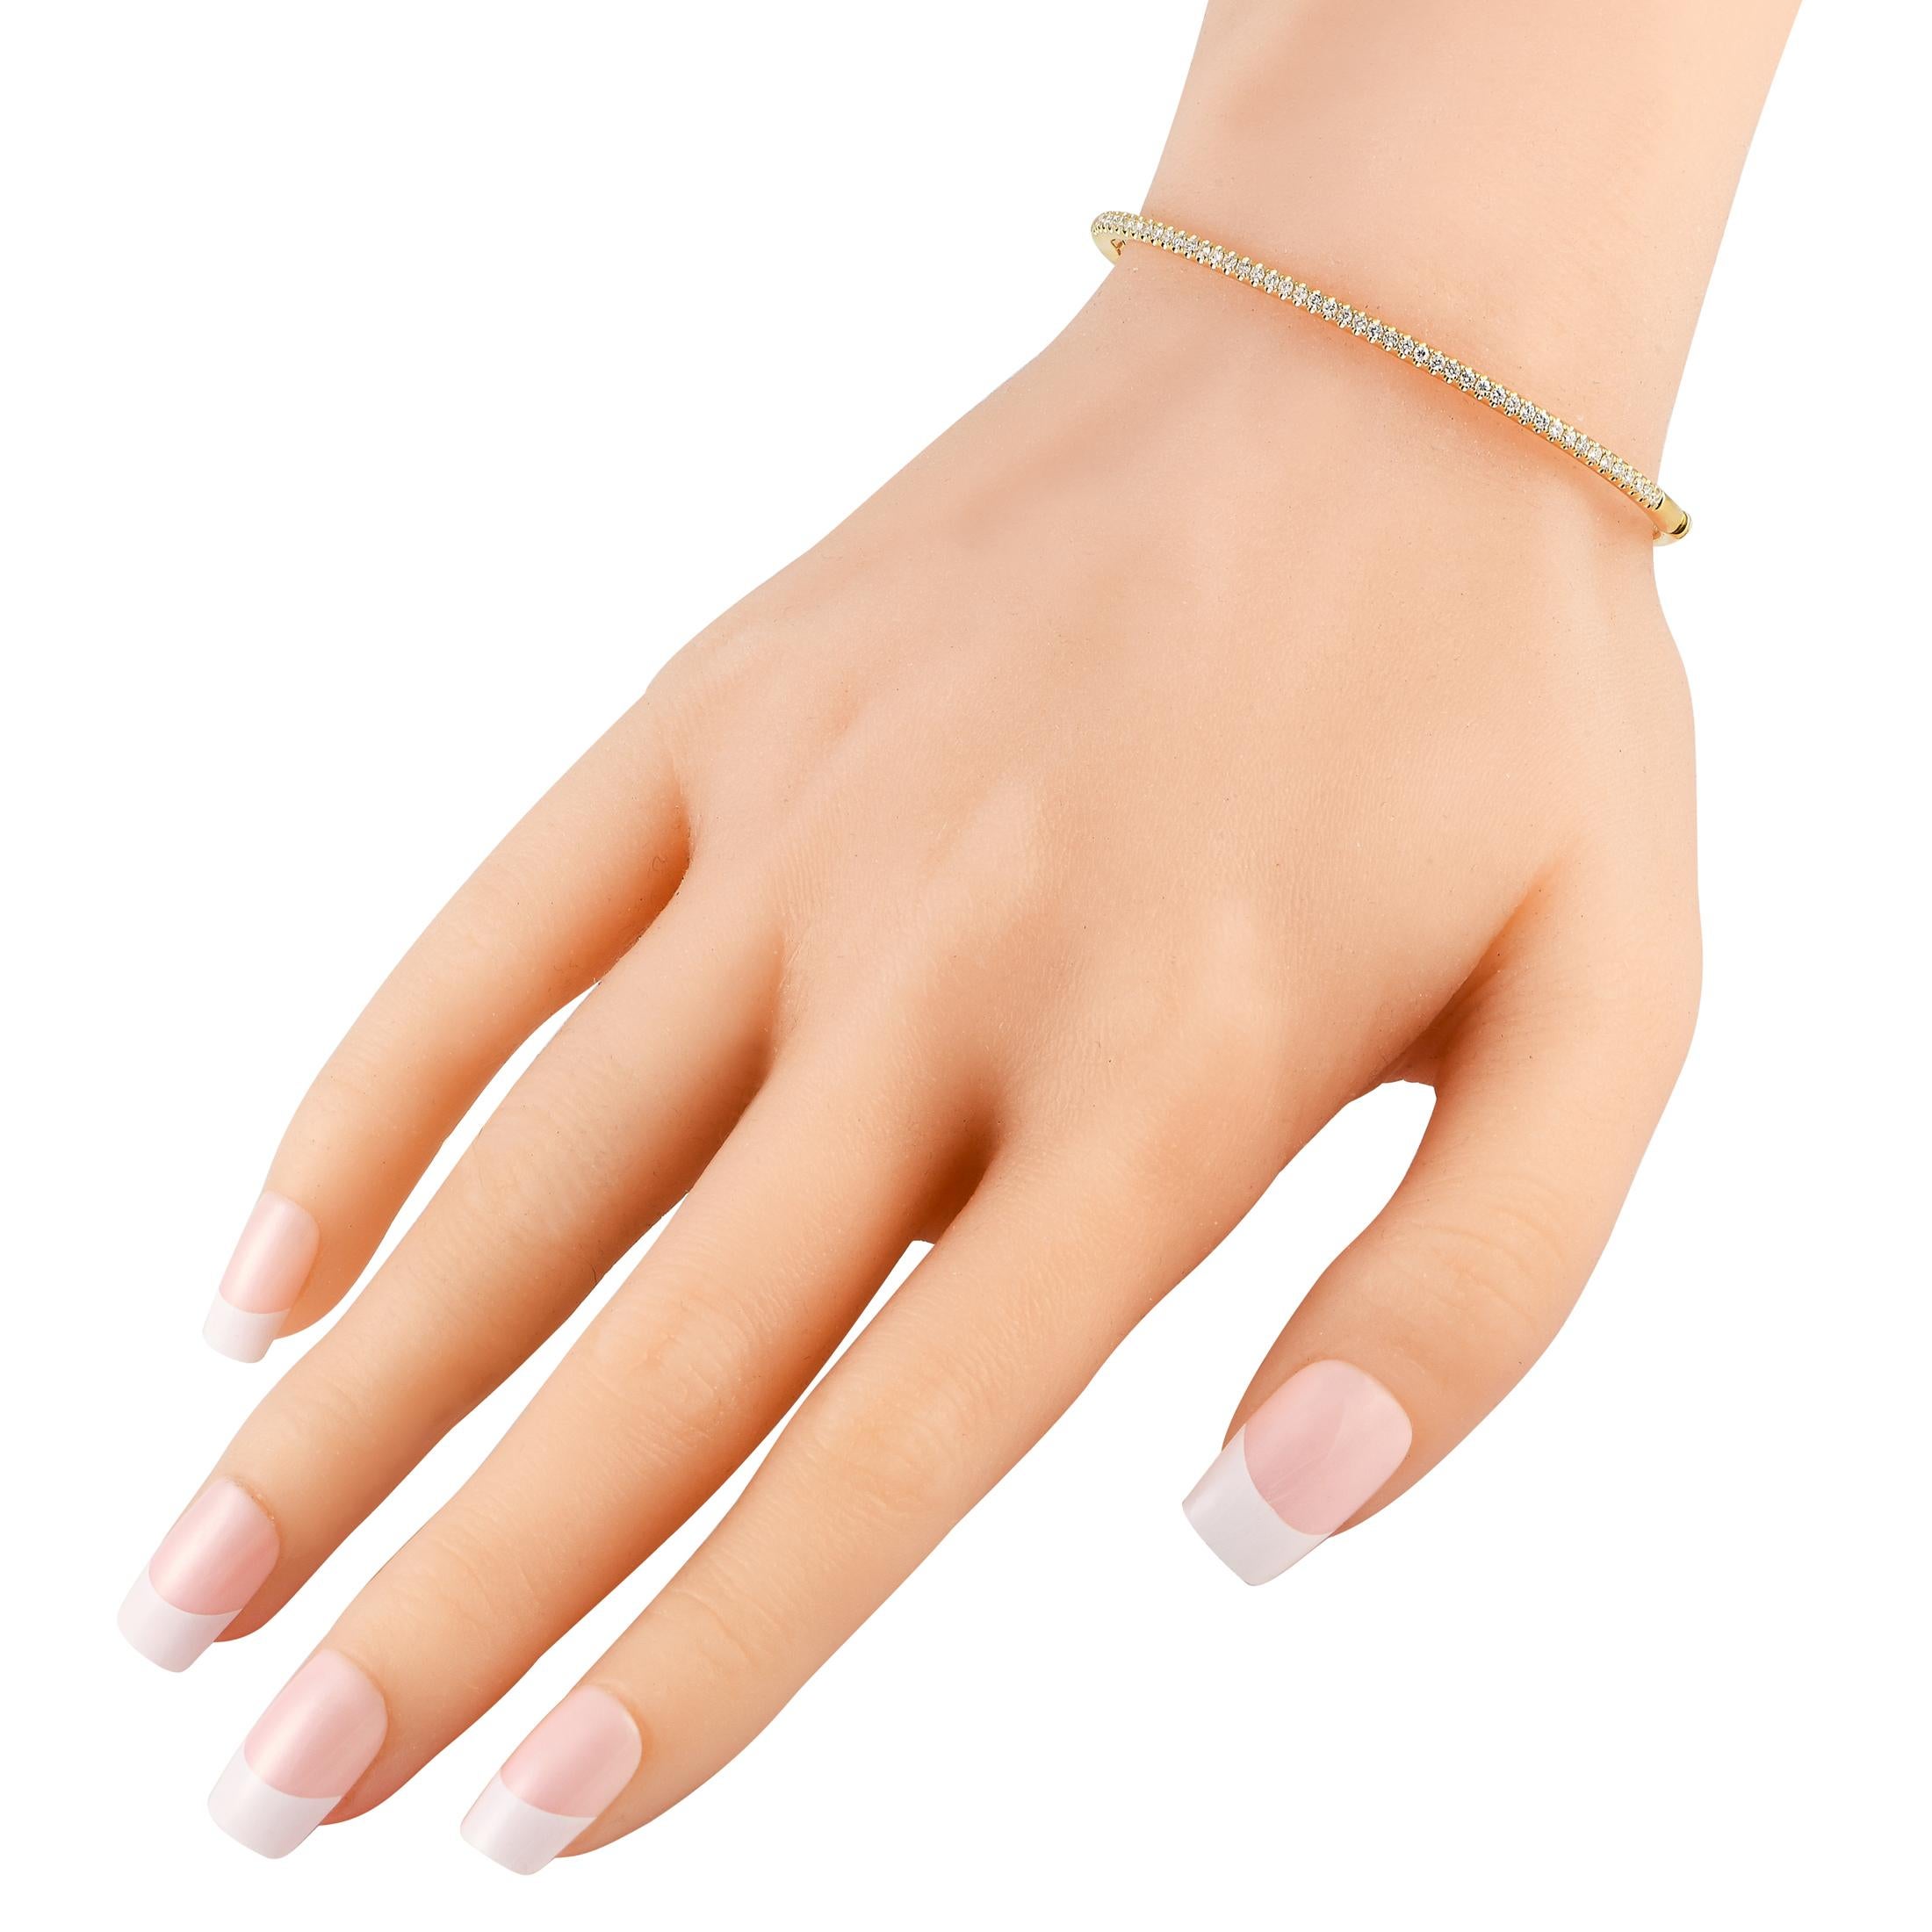 With a slim silhouette and understated sparkle, you can wear this bracelet with anything and everything for an effortlessly chic look. The sleek and slender bangle in solid 18K yellow gold has petite round diamonds running along half of its